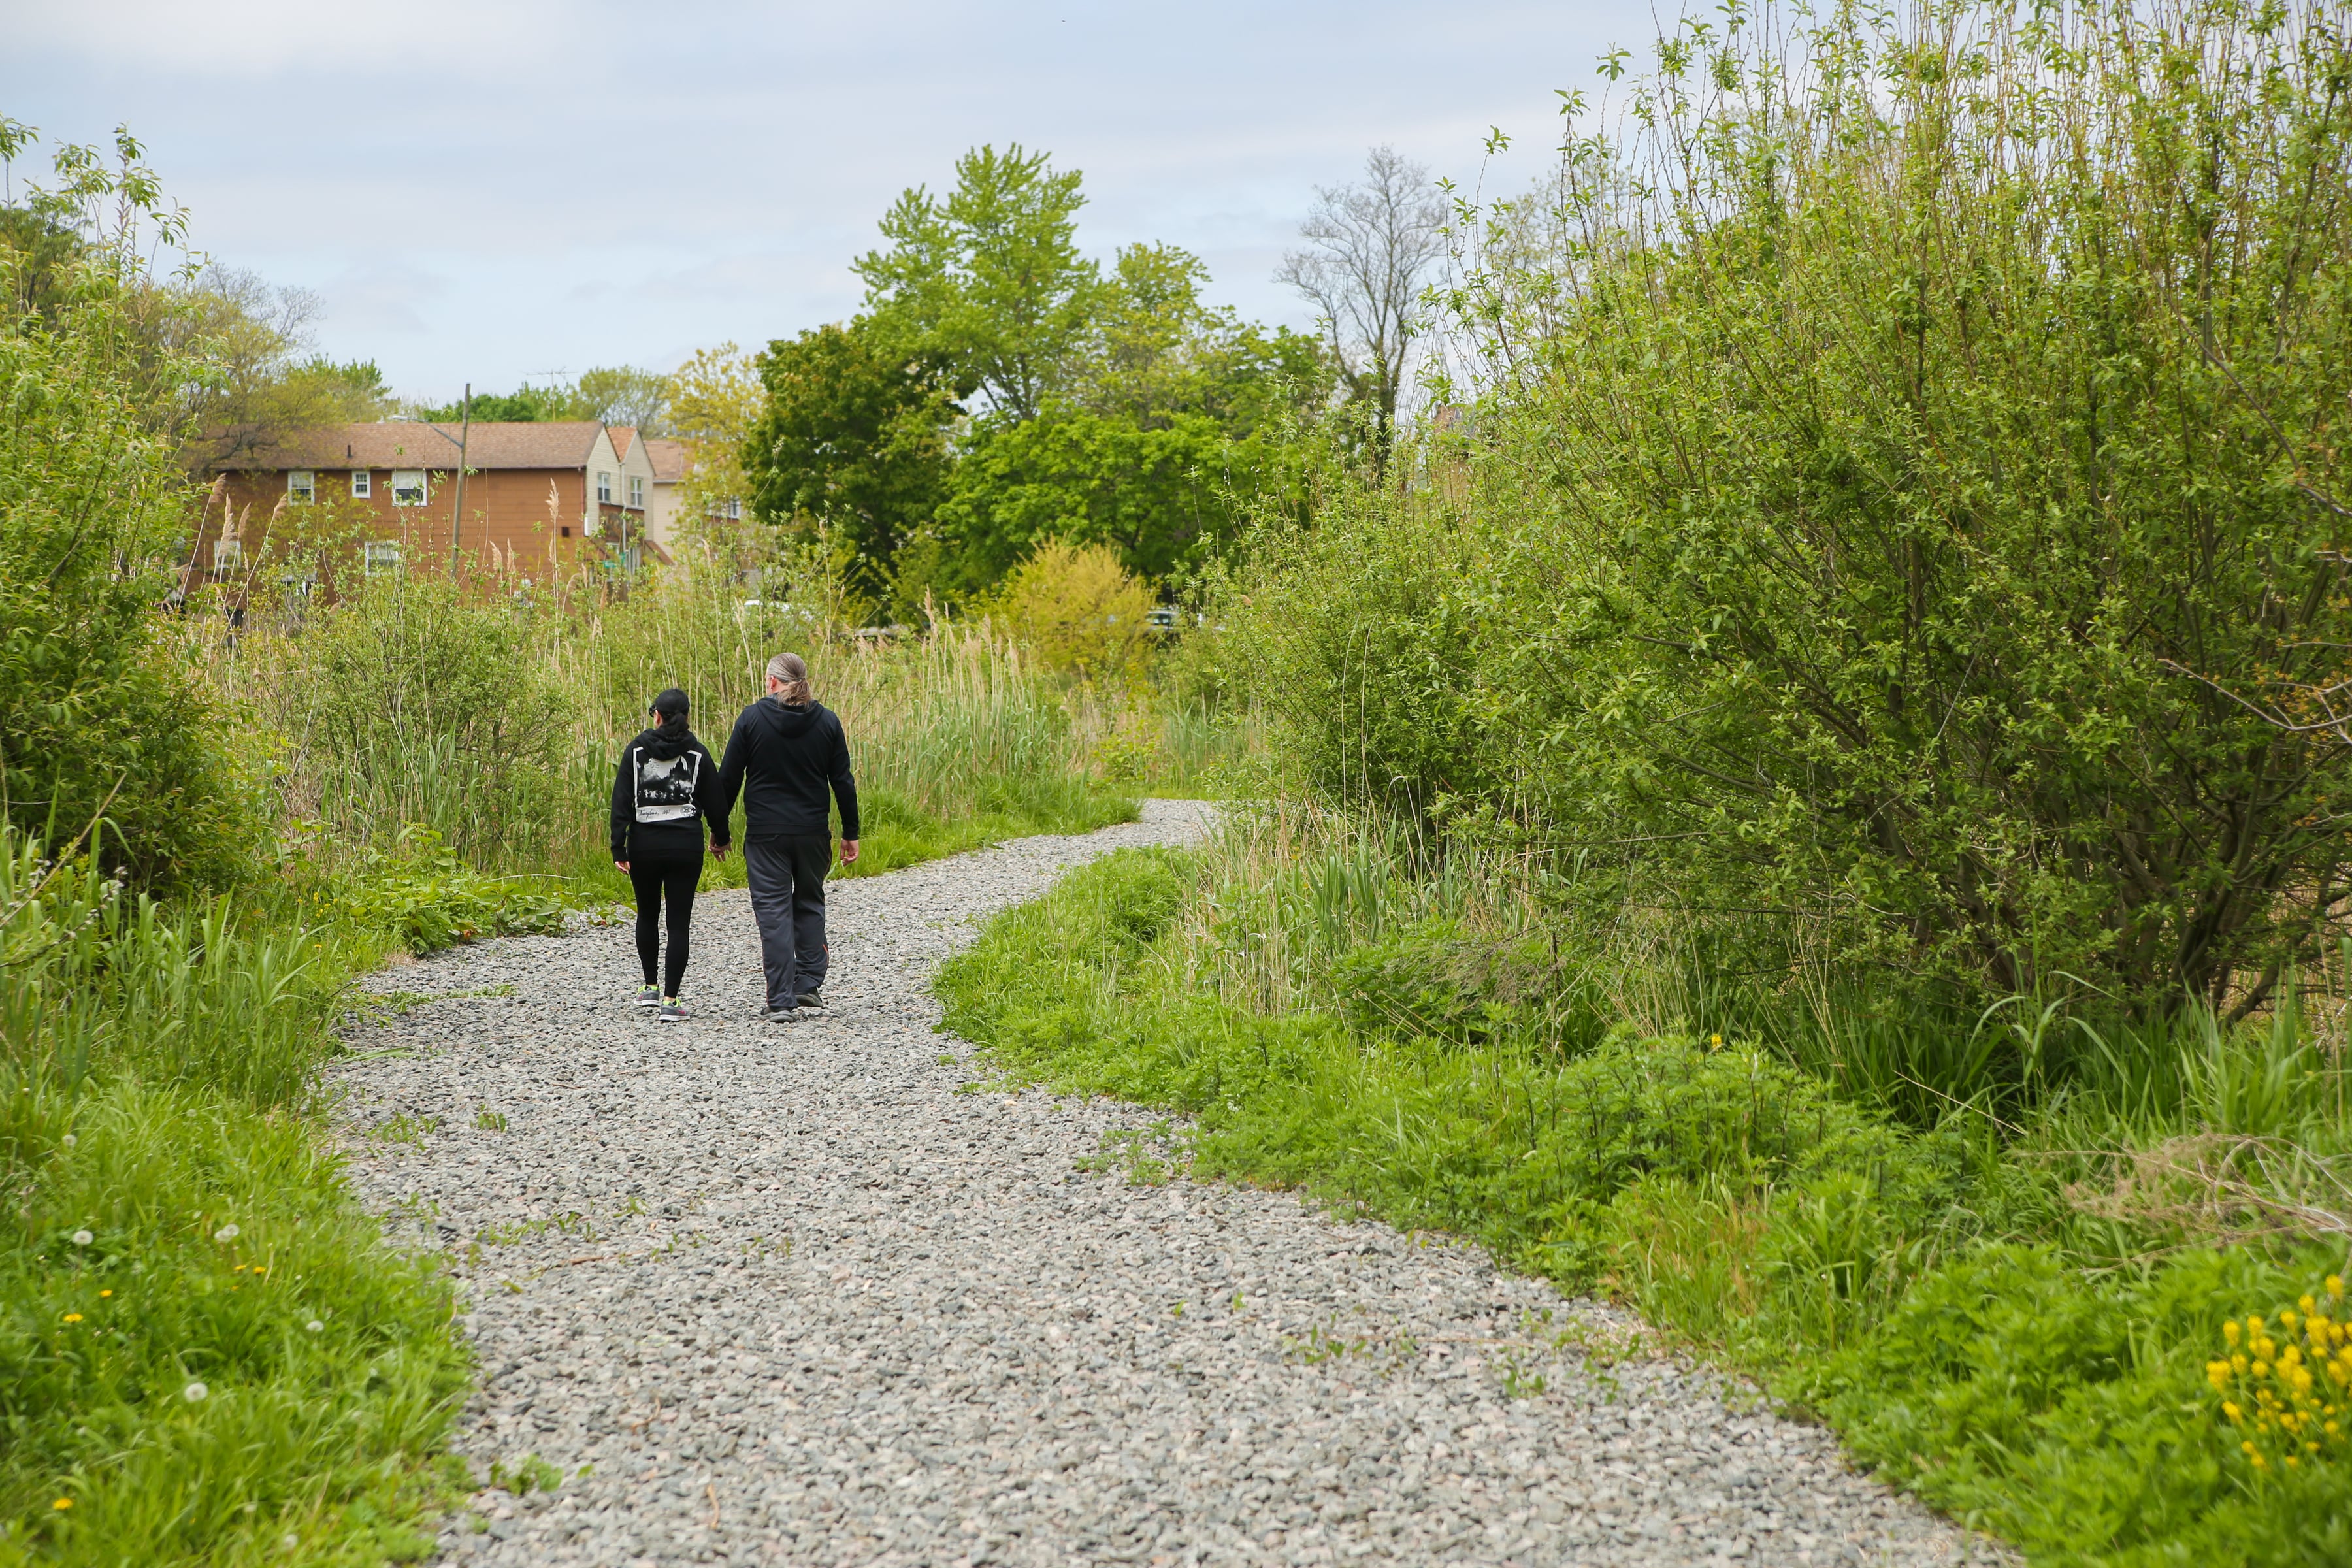 Two people walking away down a graveled path in a wooded section of a neighborhood with the roof of a house emerging in the distance.